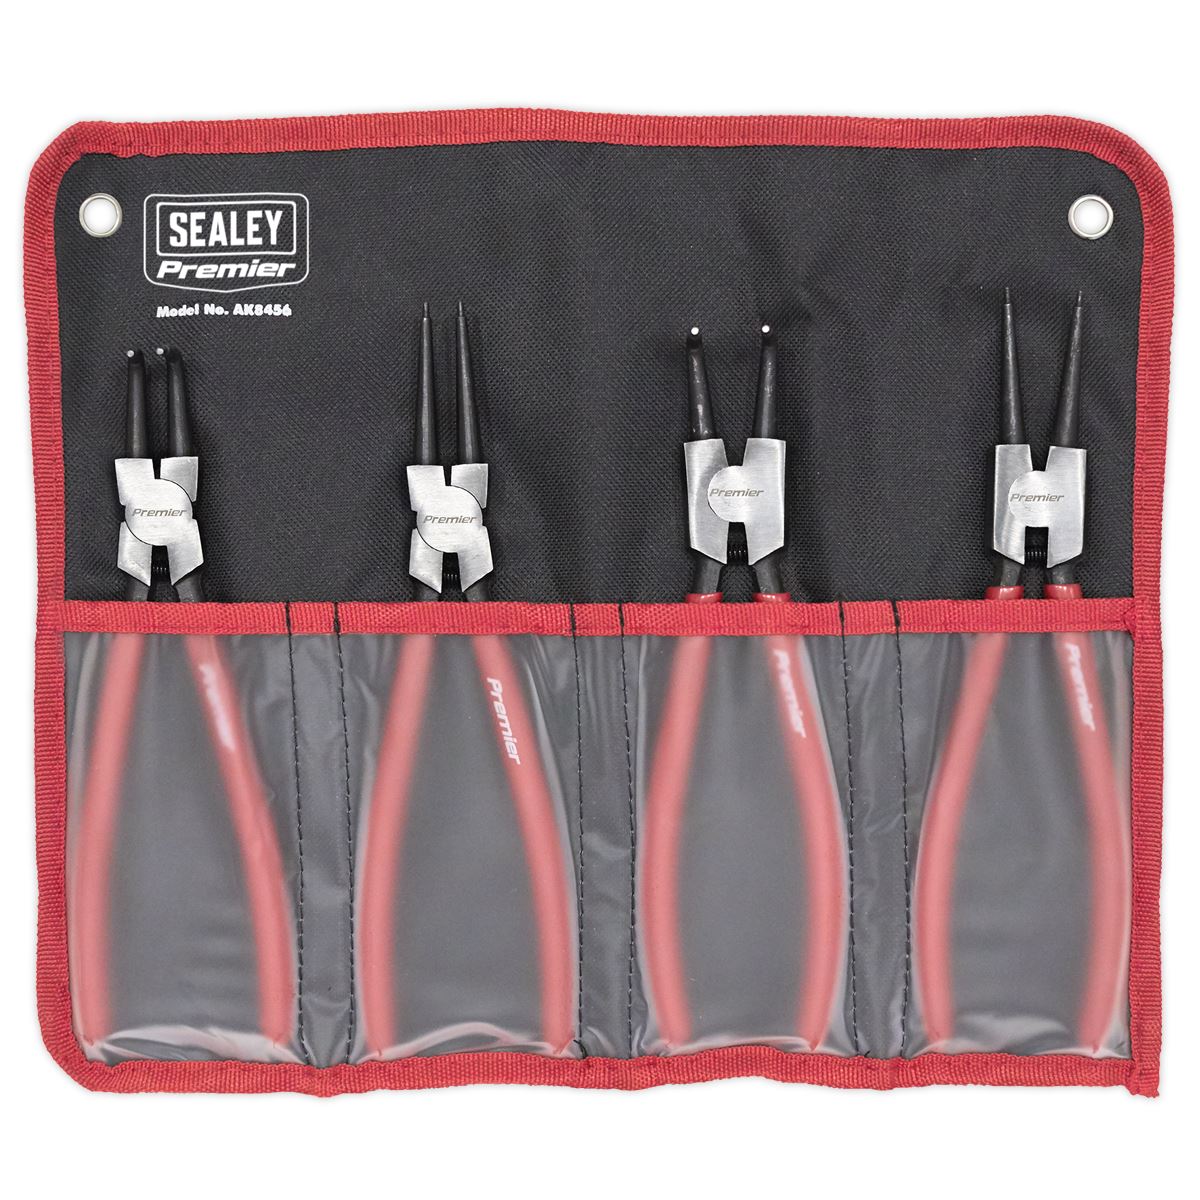 Sealey Premier 4 Piece 230mm Circlip Pliers Set in Storage Hanging Pouch Bent Nose Straight